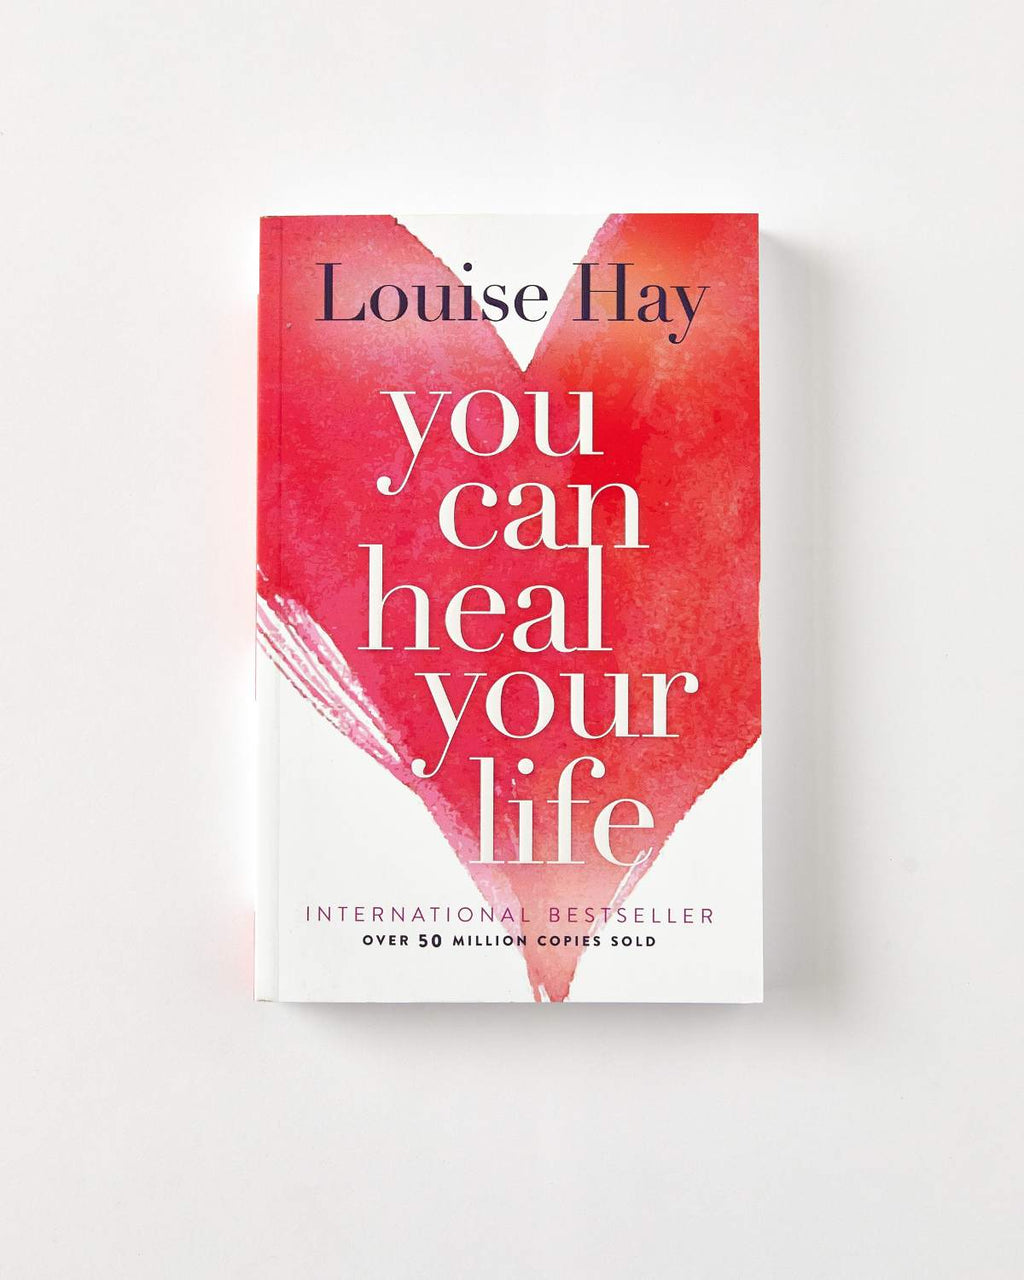 Book Summary - You Can Heal your Life (Louise Hay)